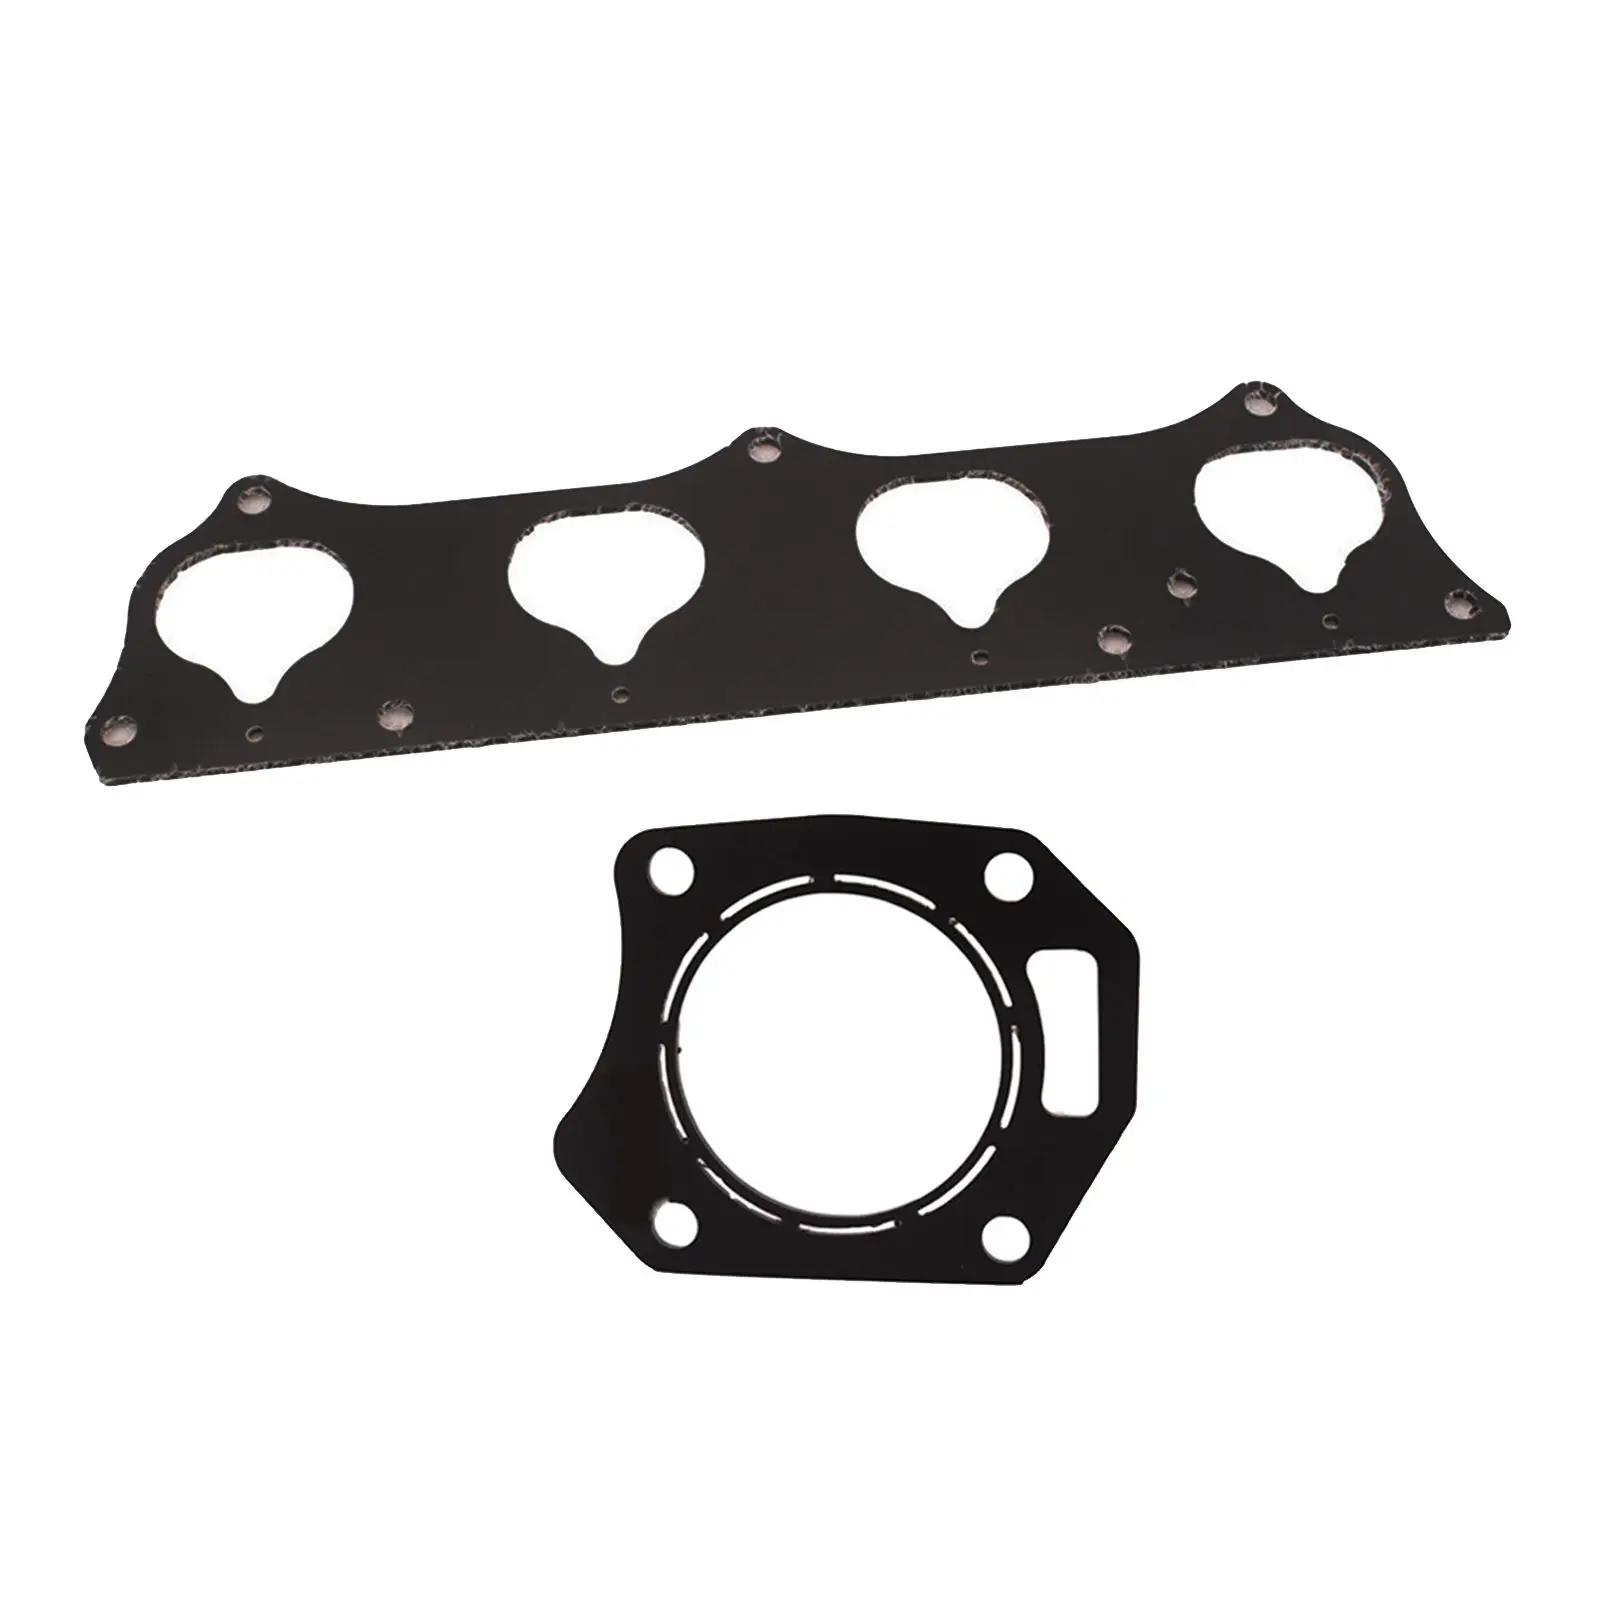 Intake Manifold Gasket For Honda Si and Acura RSX For Honda Civic Hatchback Si 2002-2005 For Acura RSX Type-S Base K20a - K20z